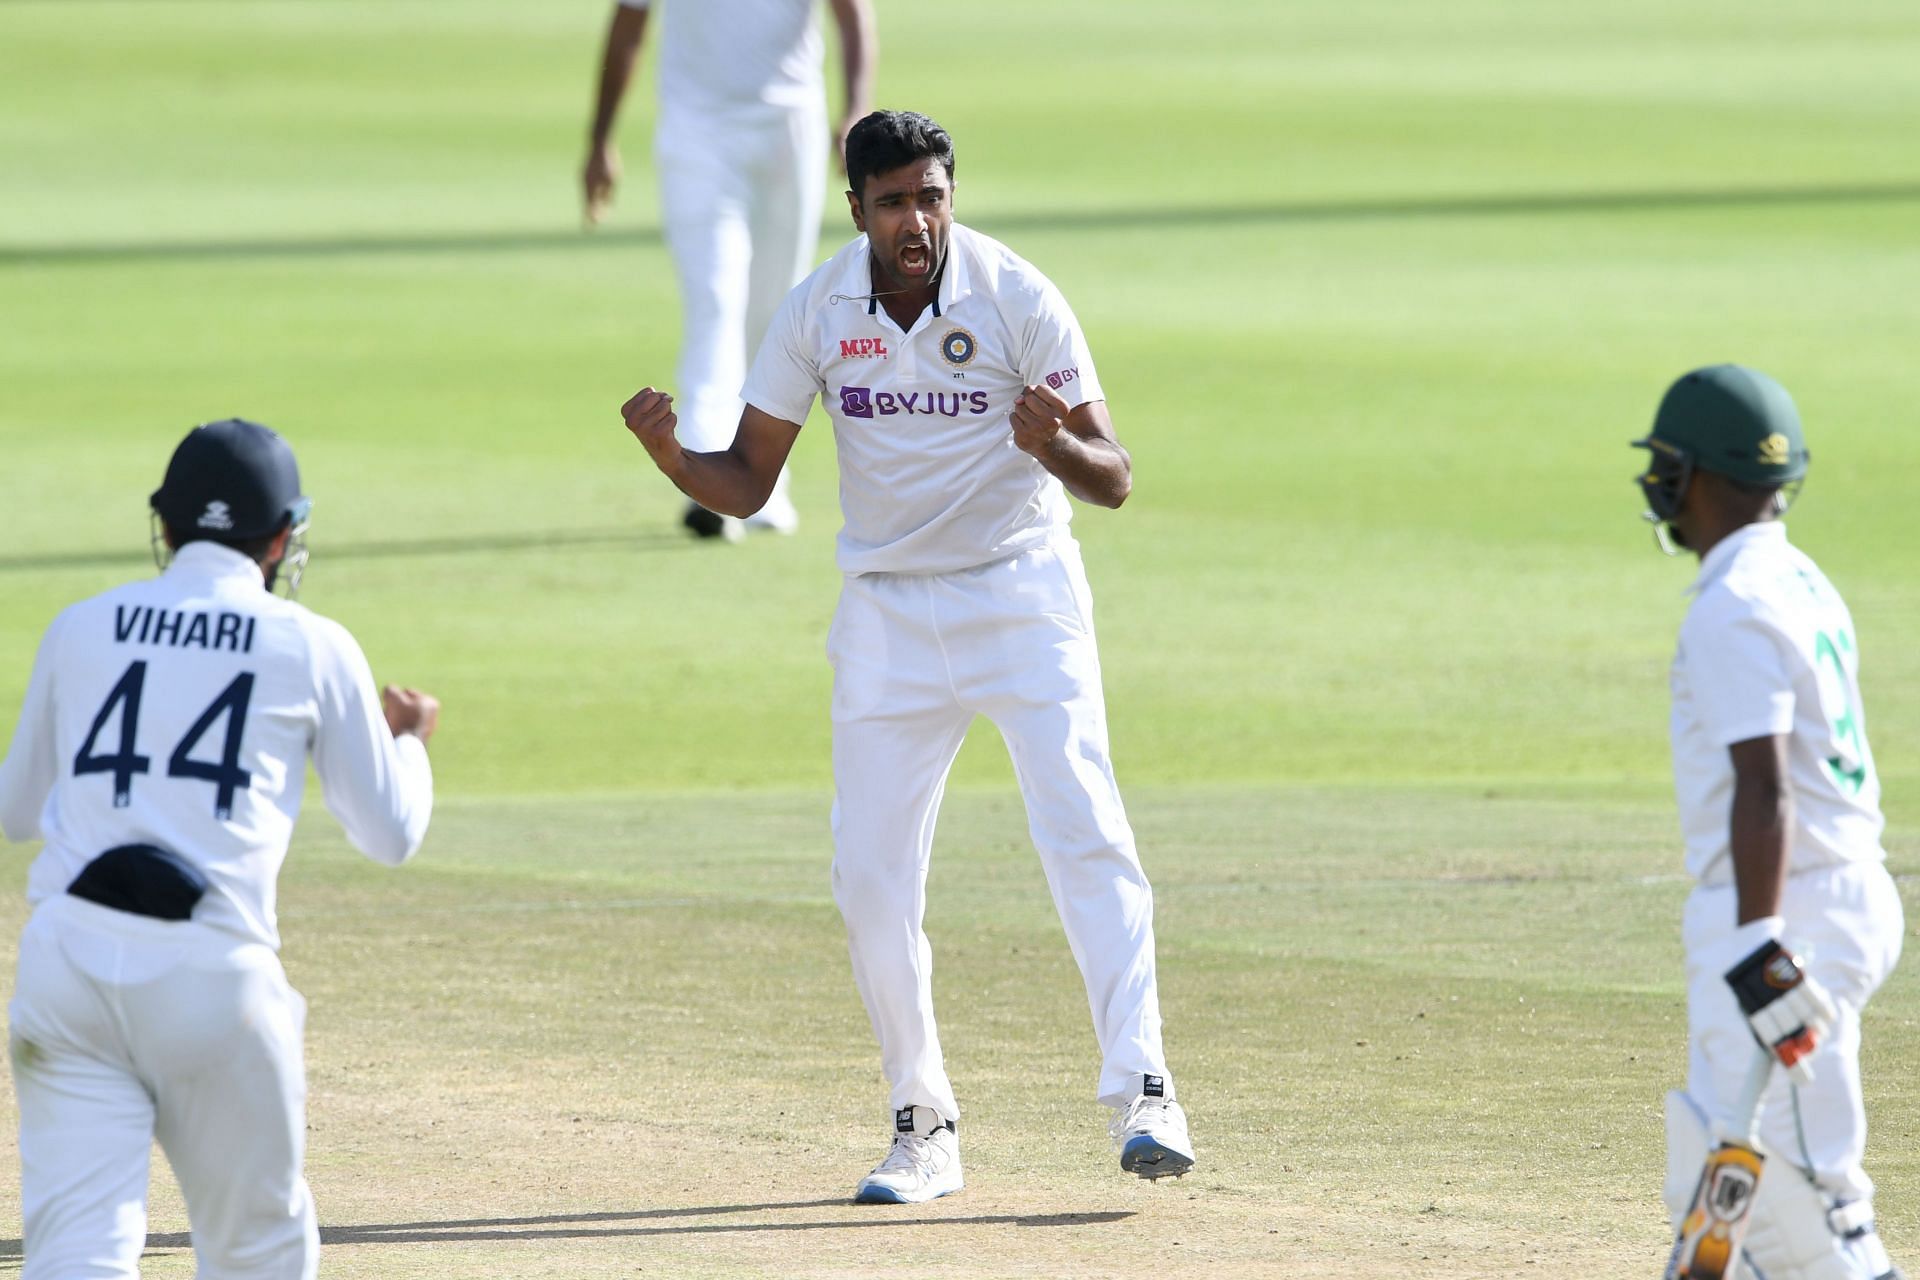 Ashwin has 436 Test wickets to his name